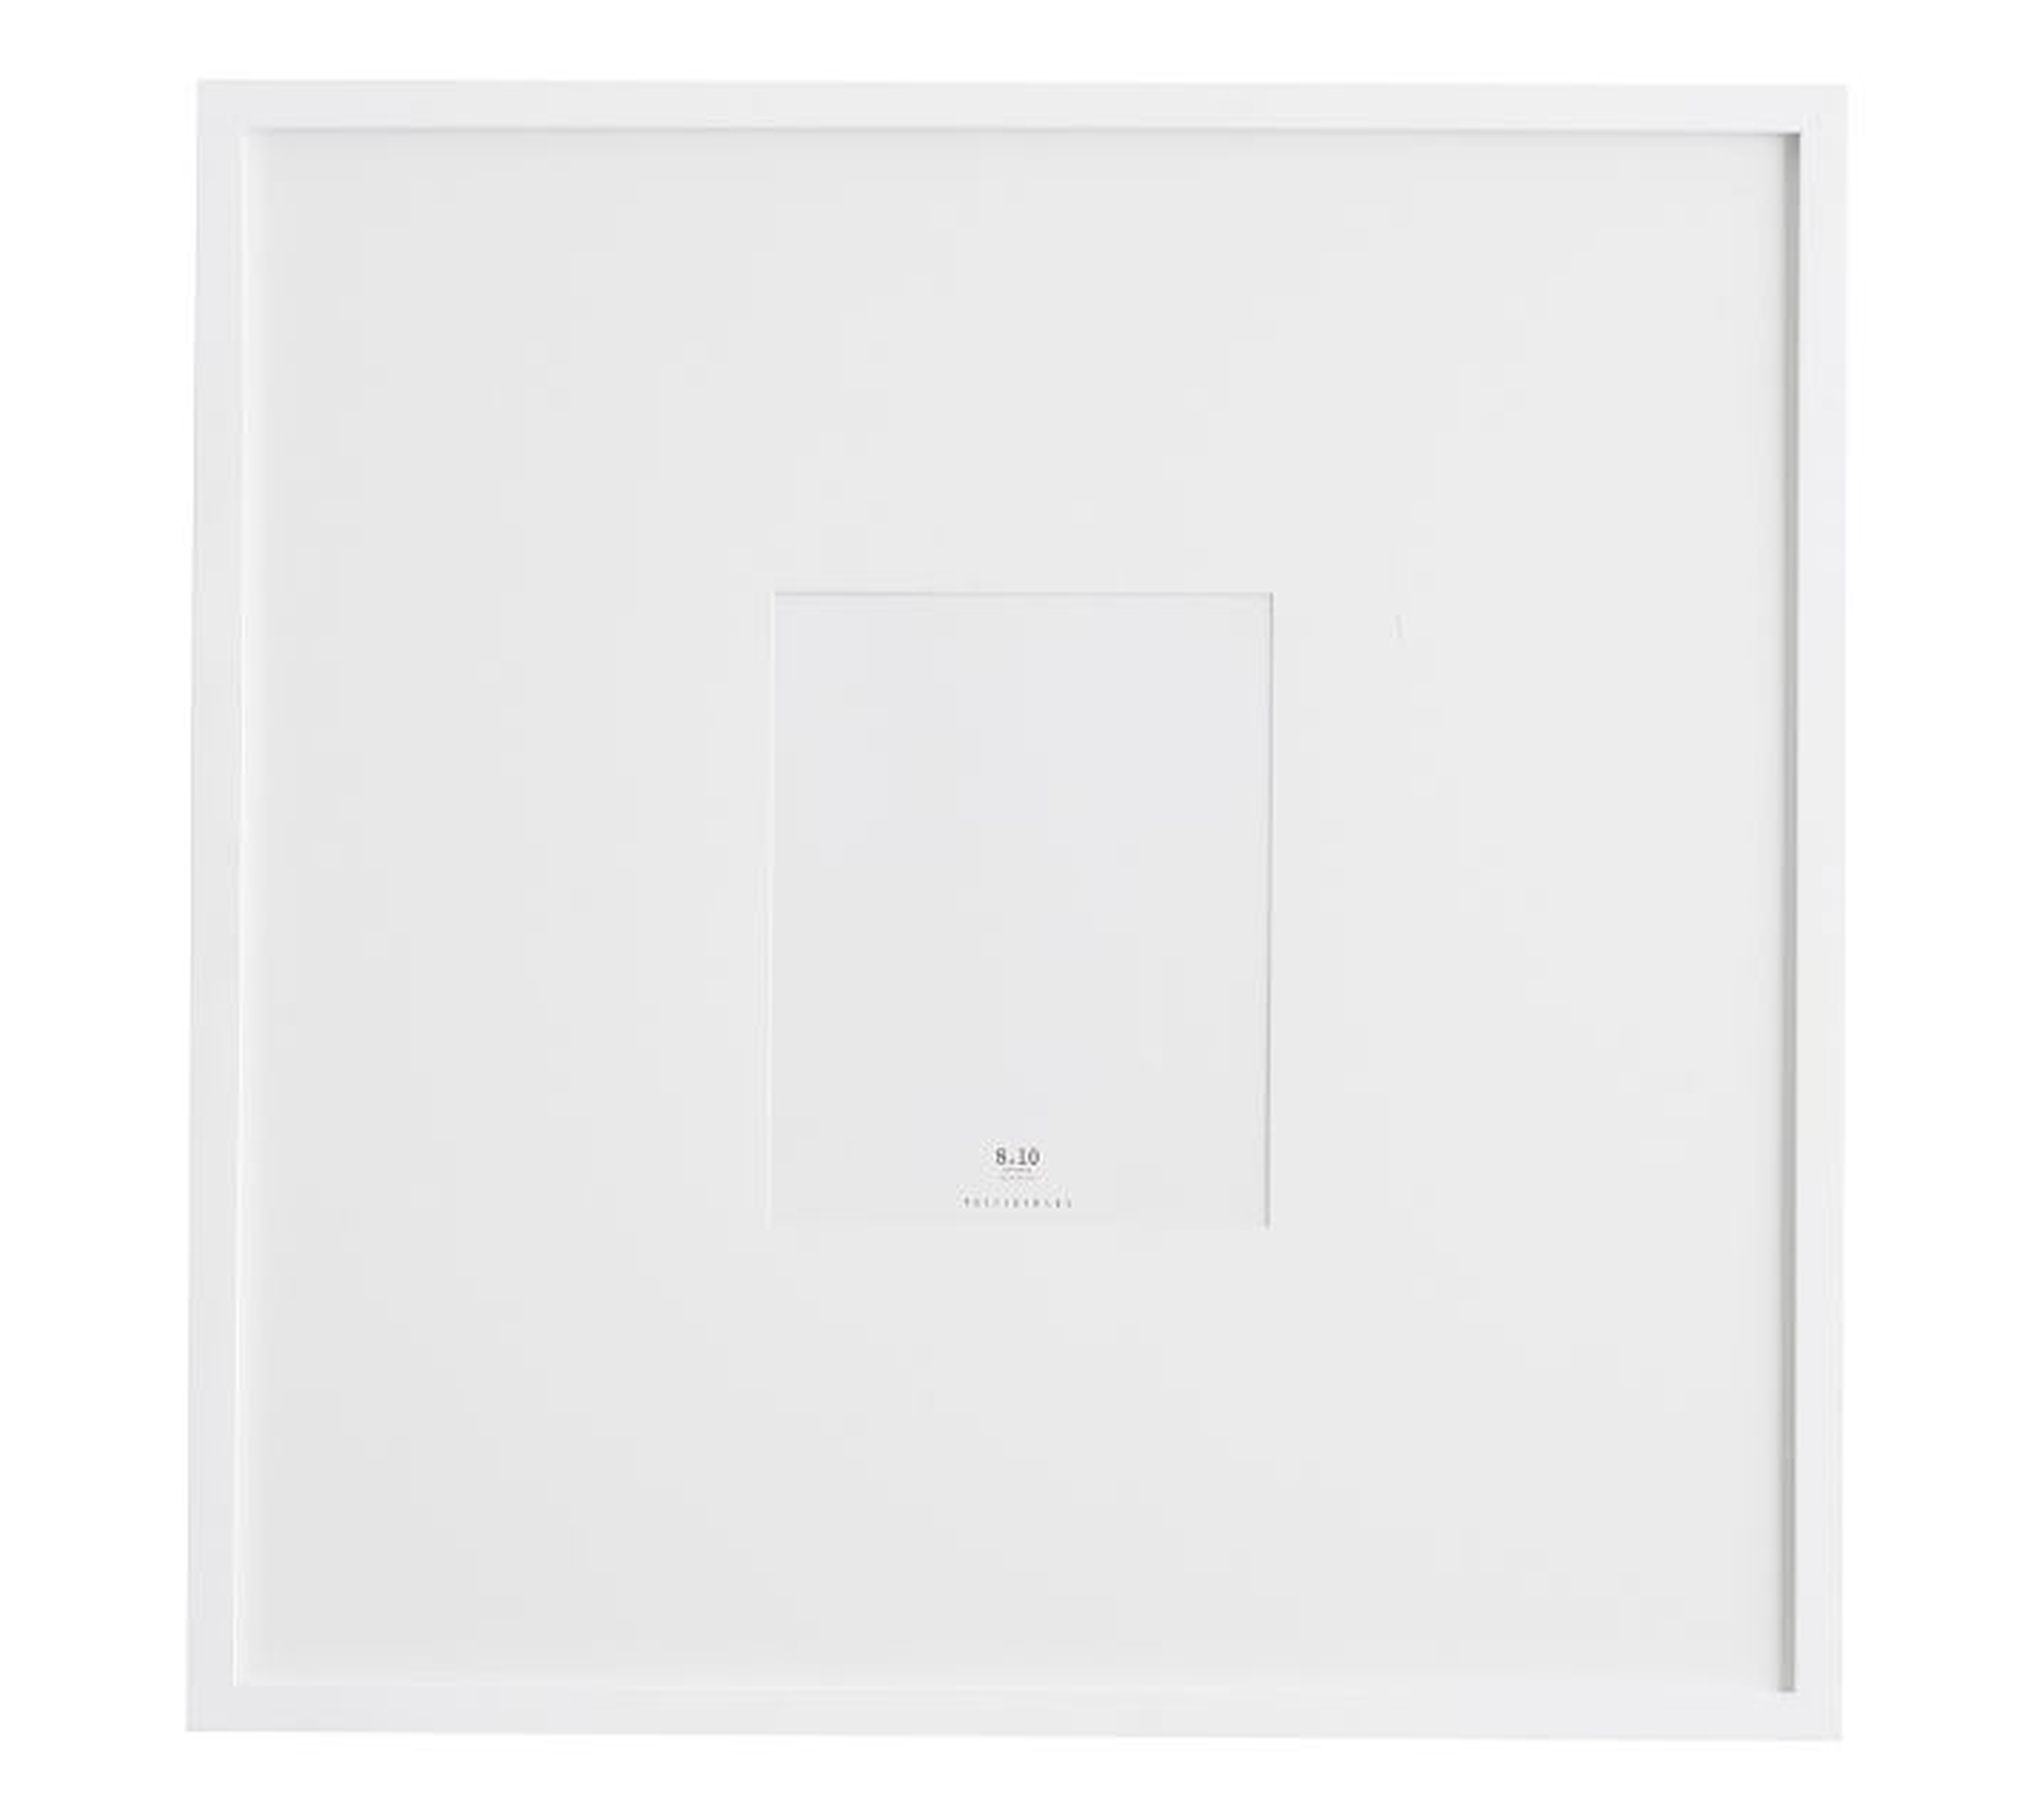 Wood Gallery Oversized Frame, 8 x 10 (25"x25" without mat), white - Pottery Barn